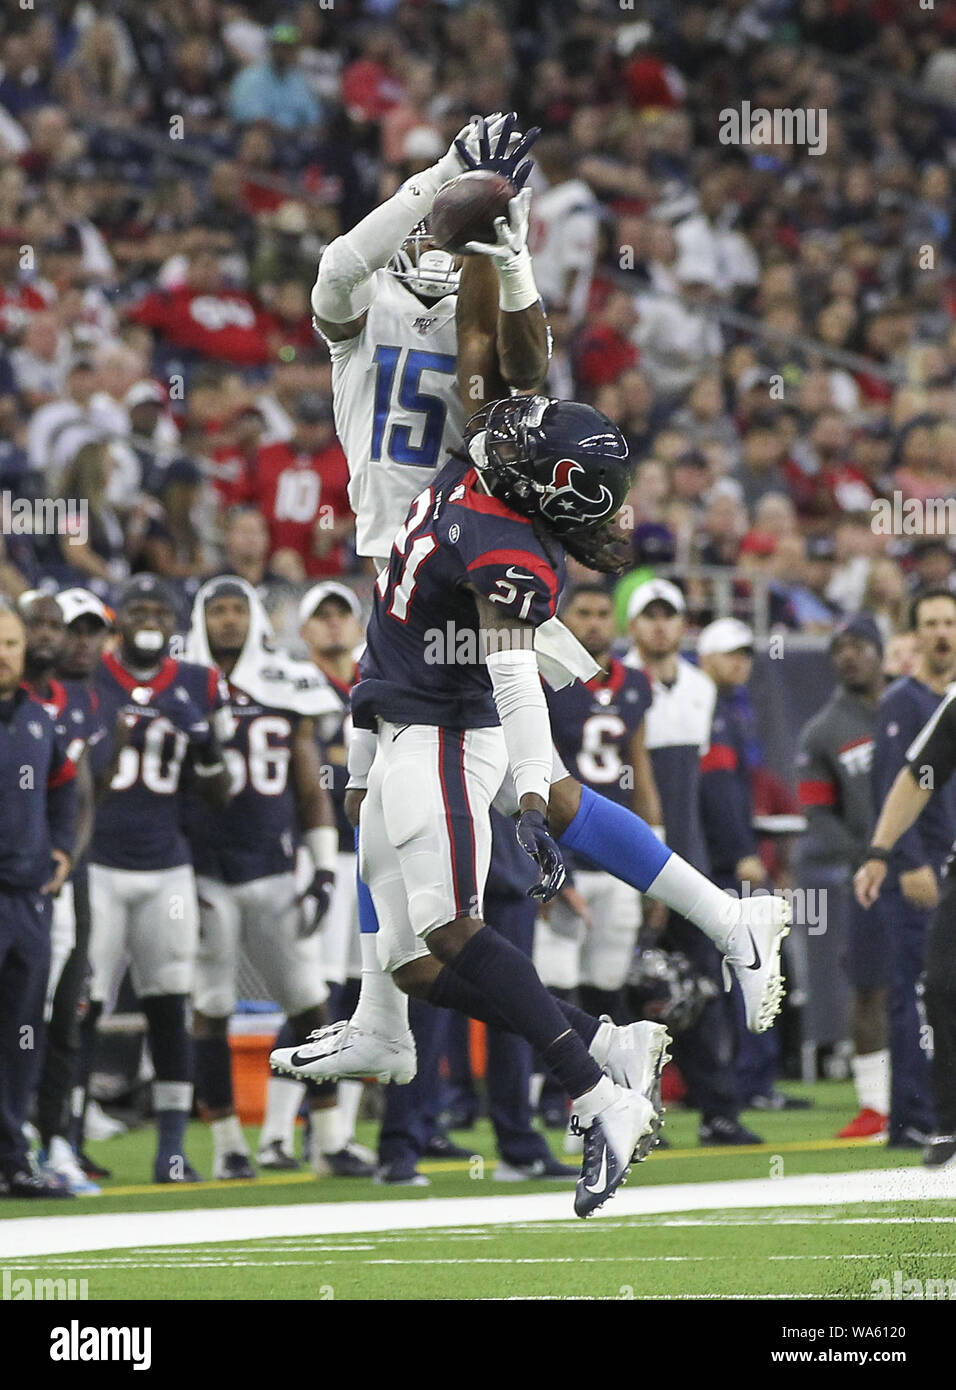 Houston, TX, USA. 17th Aug, 2019. Houston Texans cornerback Bradley Roby (21) knocks away a pass intended for Detroit Lions wide receiver Chris Lacy (15) during an NFL preseason game between the Houston Texans and the Detroit Lions at NRG Stadium in Houston, Texas, on August 17, 2019. Credit: Scott Coleman/ZUMA Wire/Alamy Live News Stock Photo